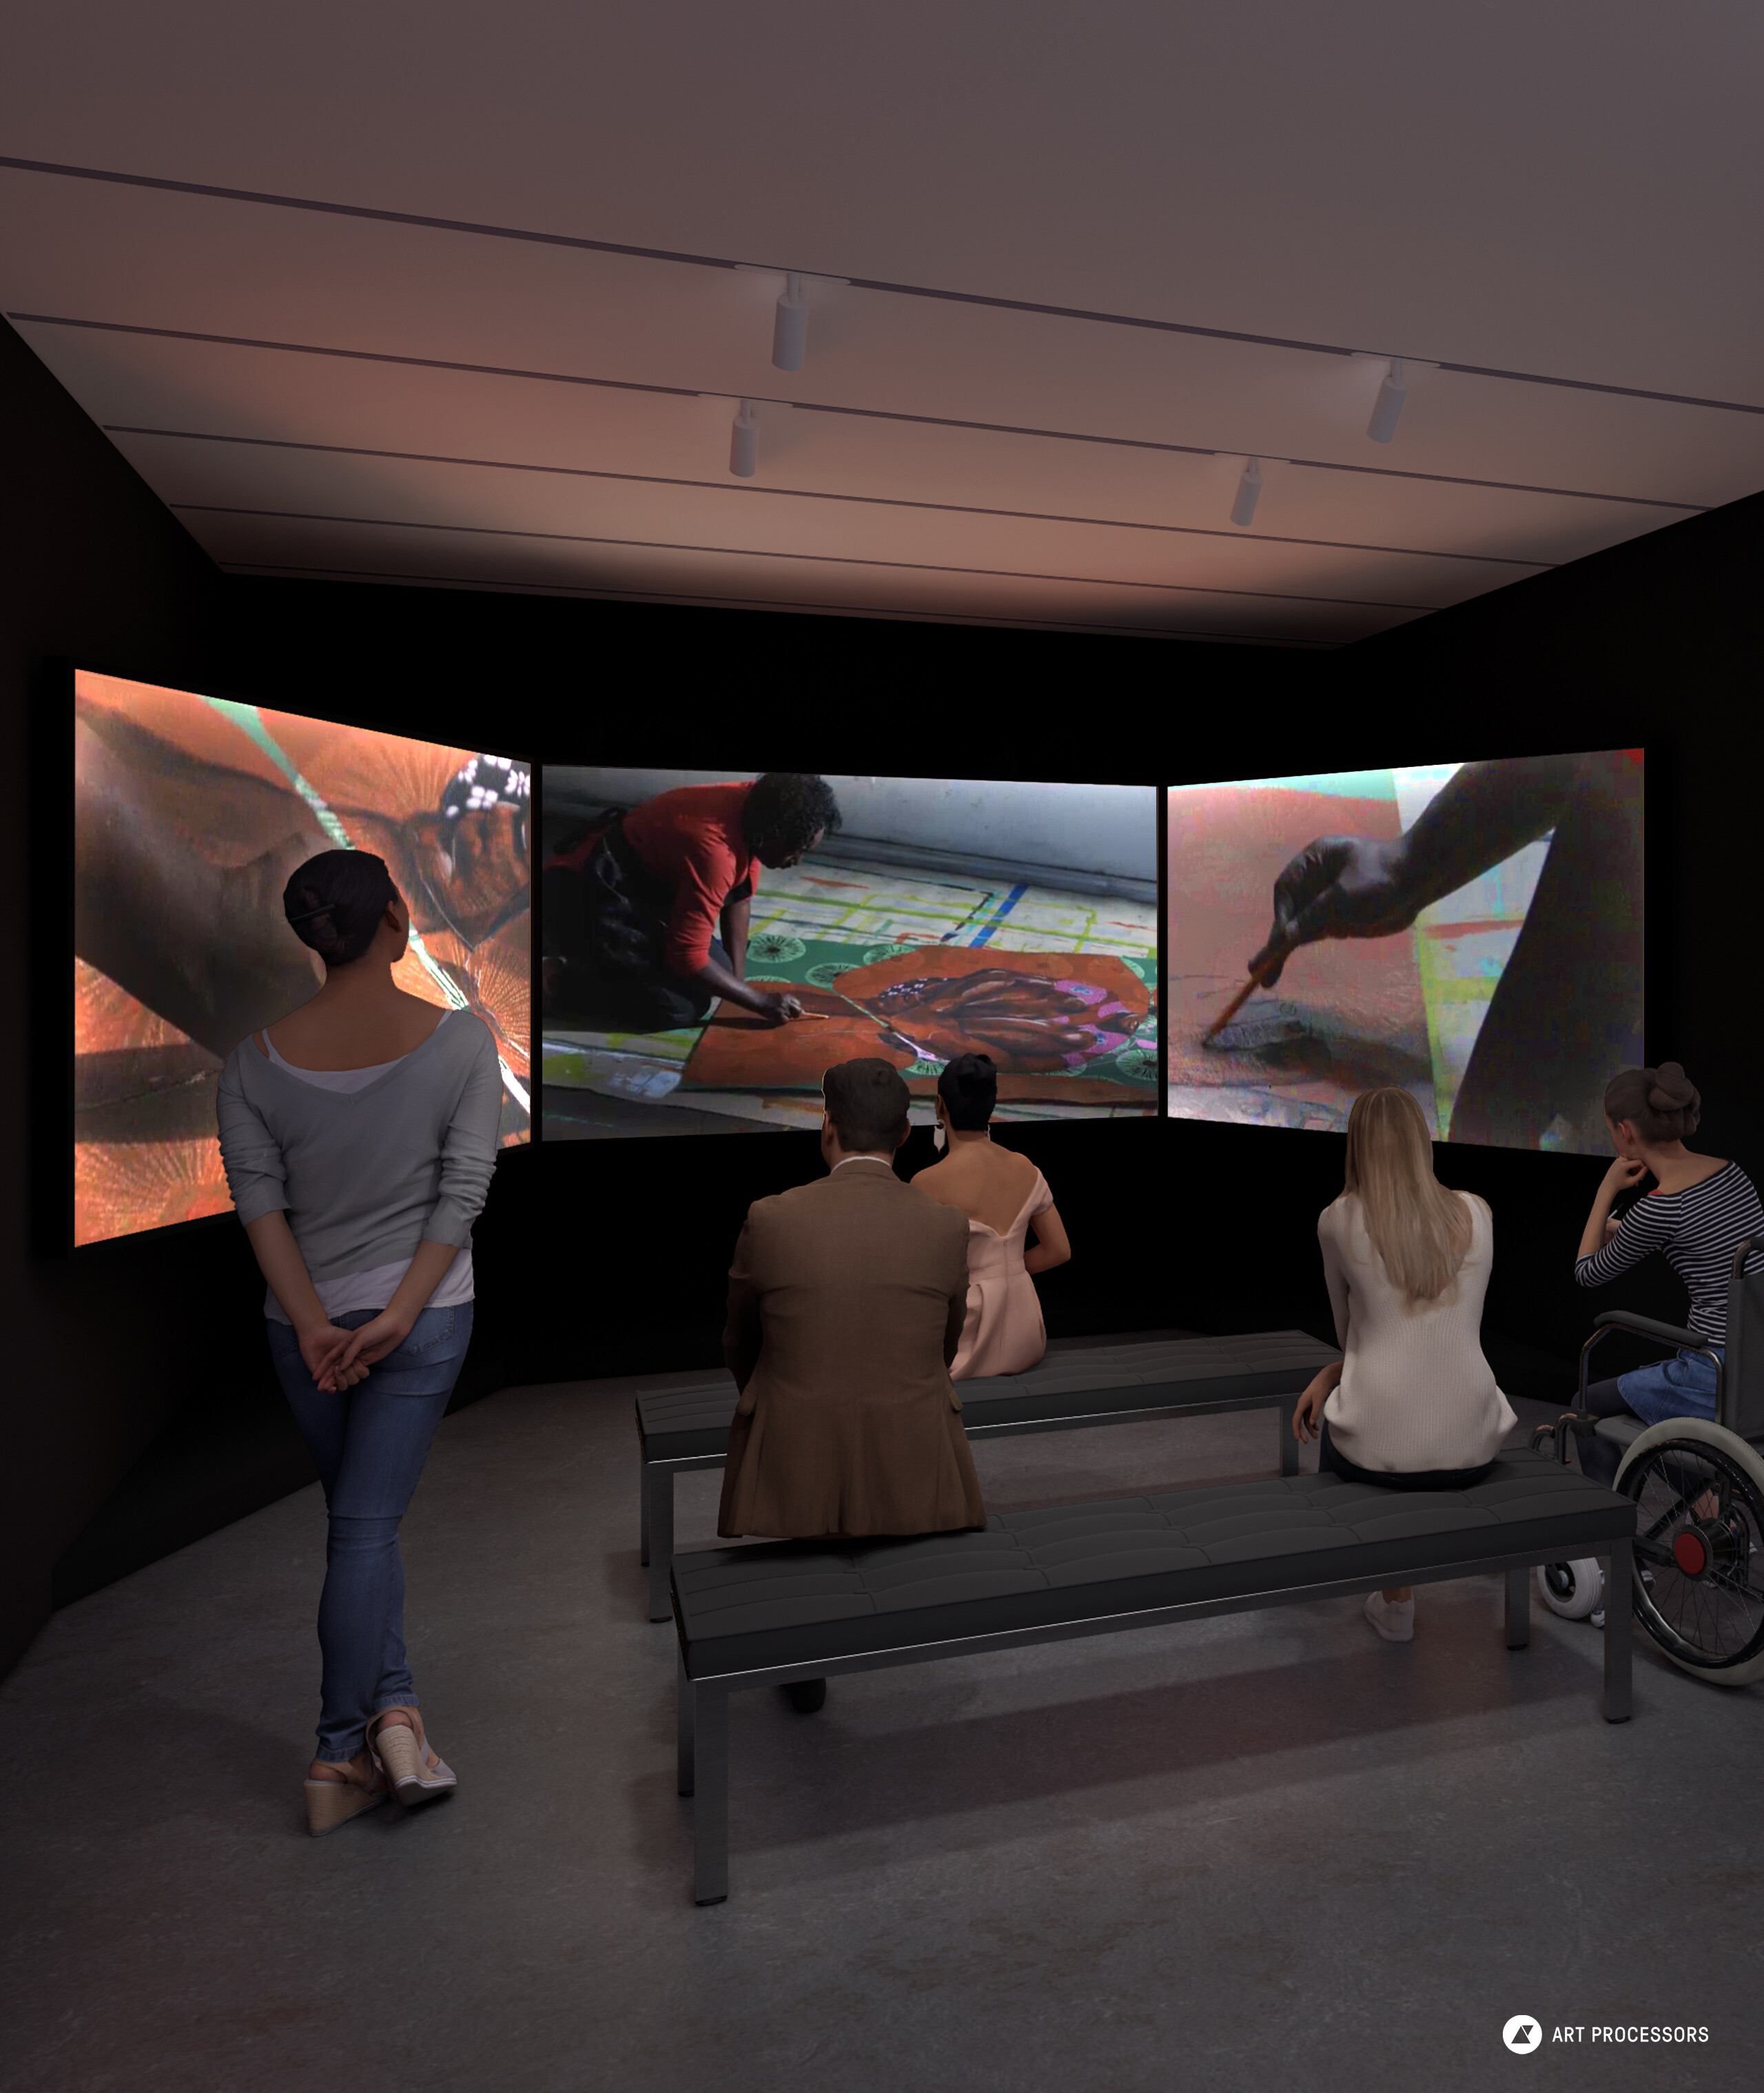 A rendering of a gallery space with three large screens playing a video of an artist working in her studio. Five people are facing away to watch the video screens. Three people are sitting on benches; the person on the right is in a wheelchair, and the person on the left is standing. Art Processors' logo is in the bottom right corner.